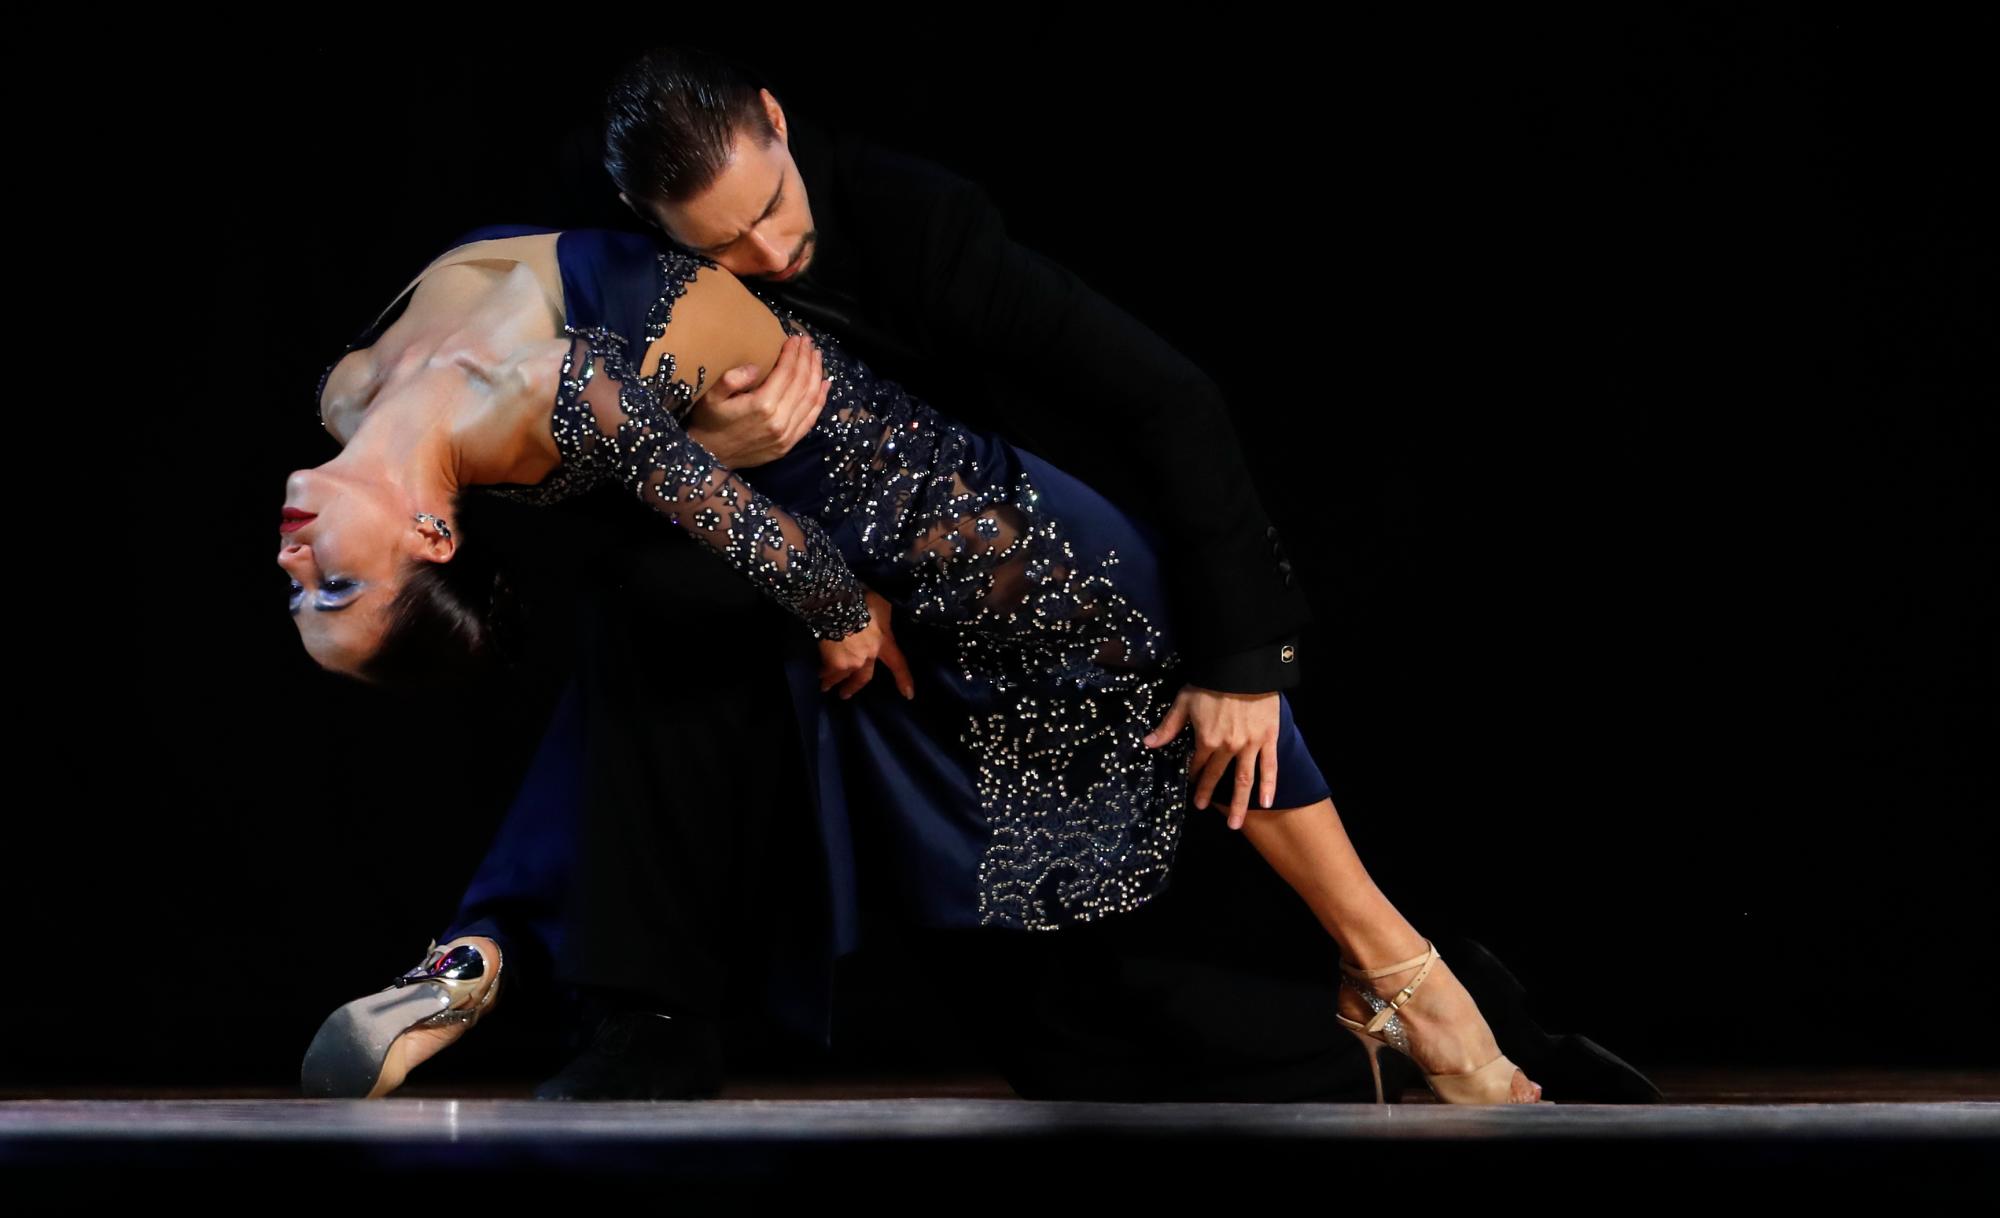 Dmitriy Kuznetsov and Olga Nikolaeva, from Russia, compete in the Stage category final at the annual Tango Dance World Championship in Buenos Aires, Argentina, Wednesday, Aug. 21, 2019. 